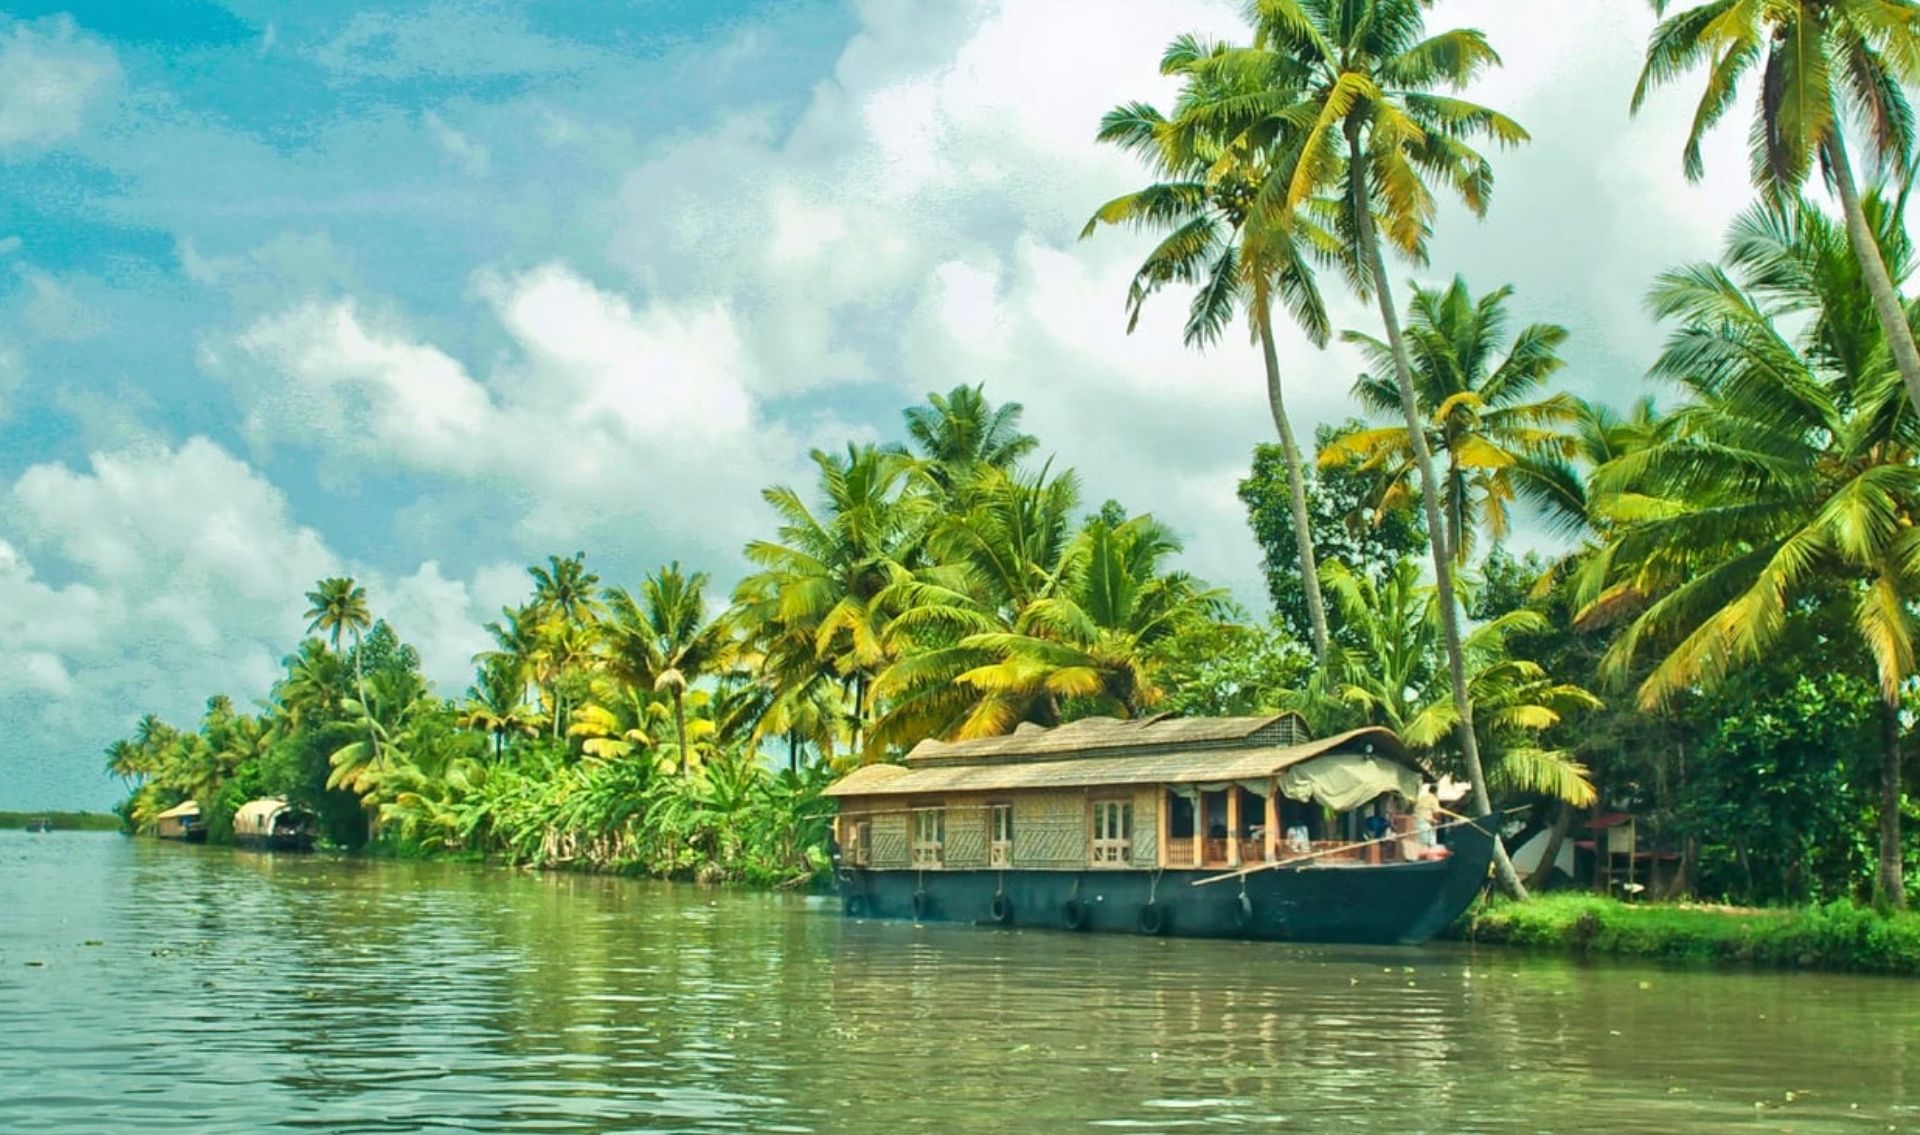 travel packages kerala